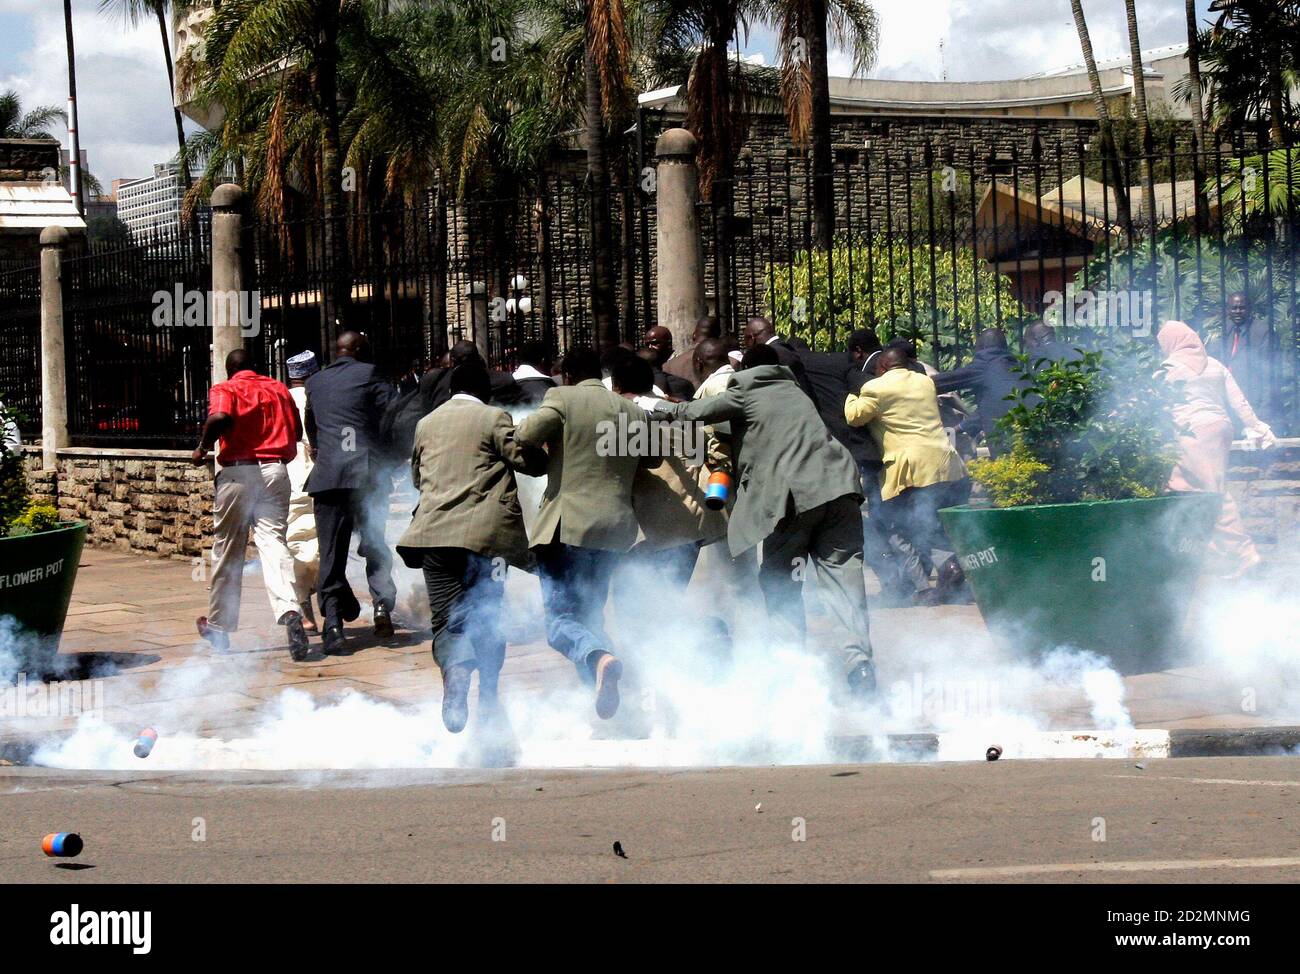 Kenya's opposition leaders run to parliament buildings during a political protest in Nairobi December 5, 2006. Kenya police on Tuesday tear-gassed opposition leaders and backers protesting a government-approved change to the former ruling party's leadership viewed by many as a political coup. REUTERS/Thomas Mukoya (KENYA) Stock Photo